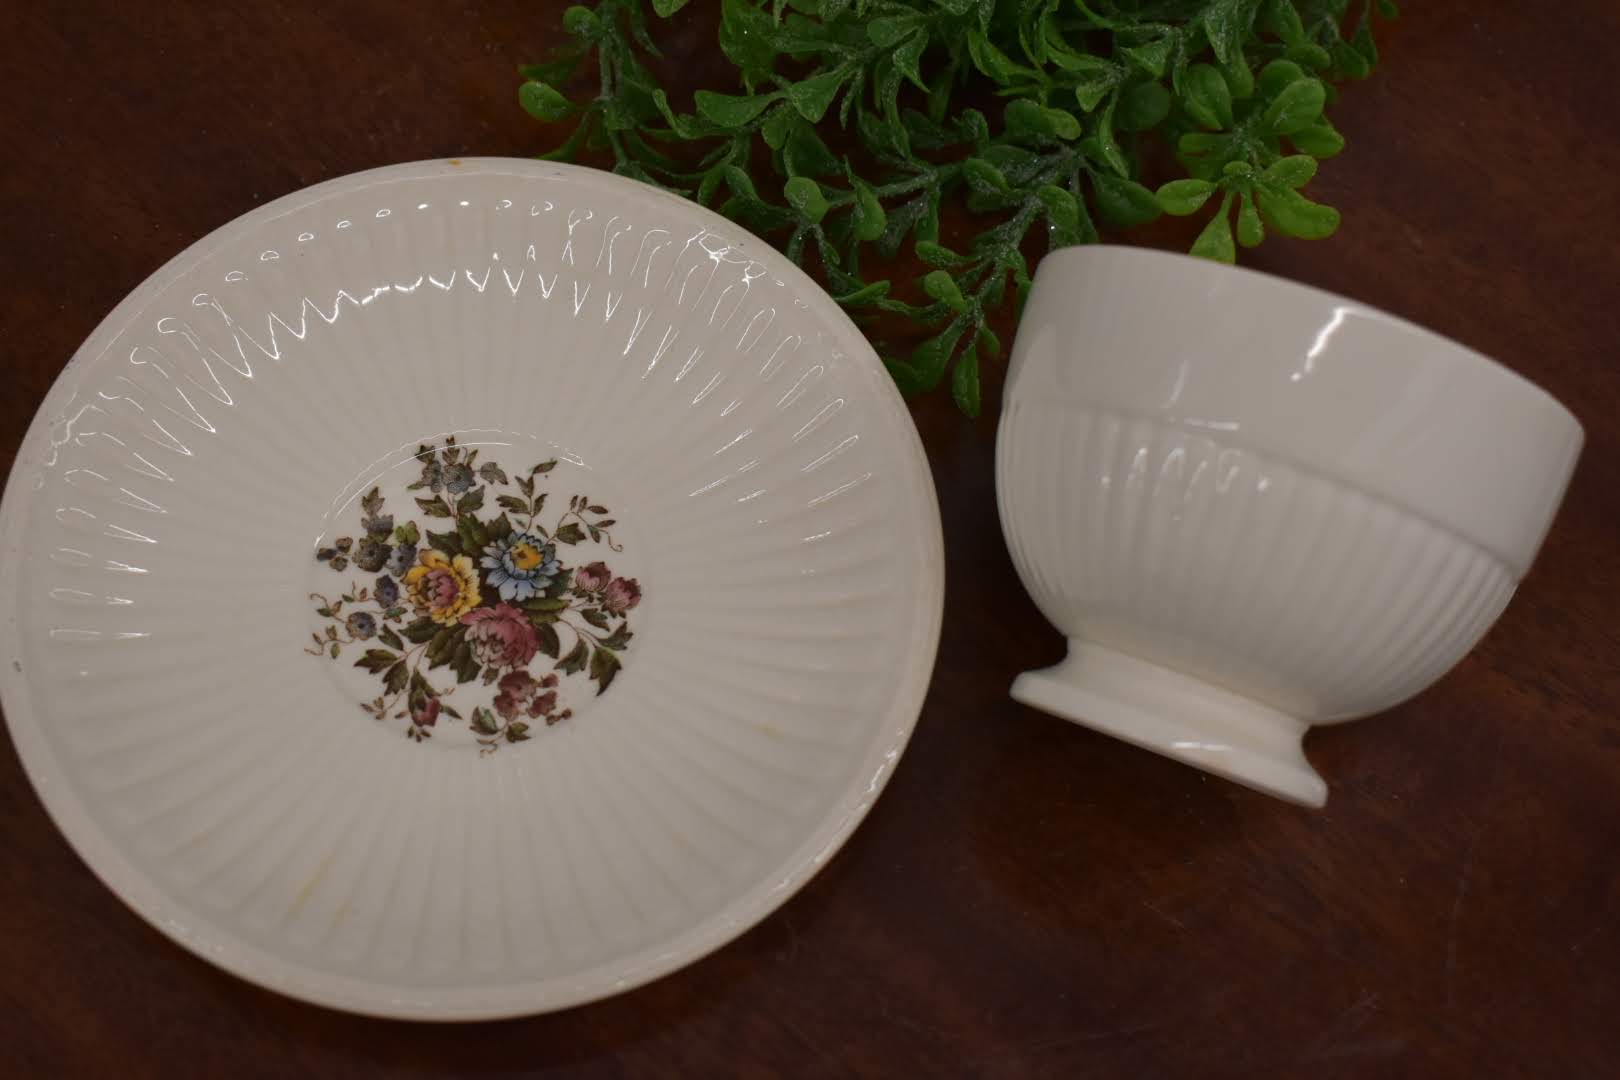 Wedgewood - Fine Porcelain China - From England - Cup and Saucer